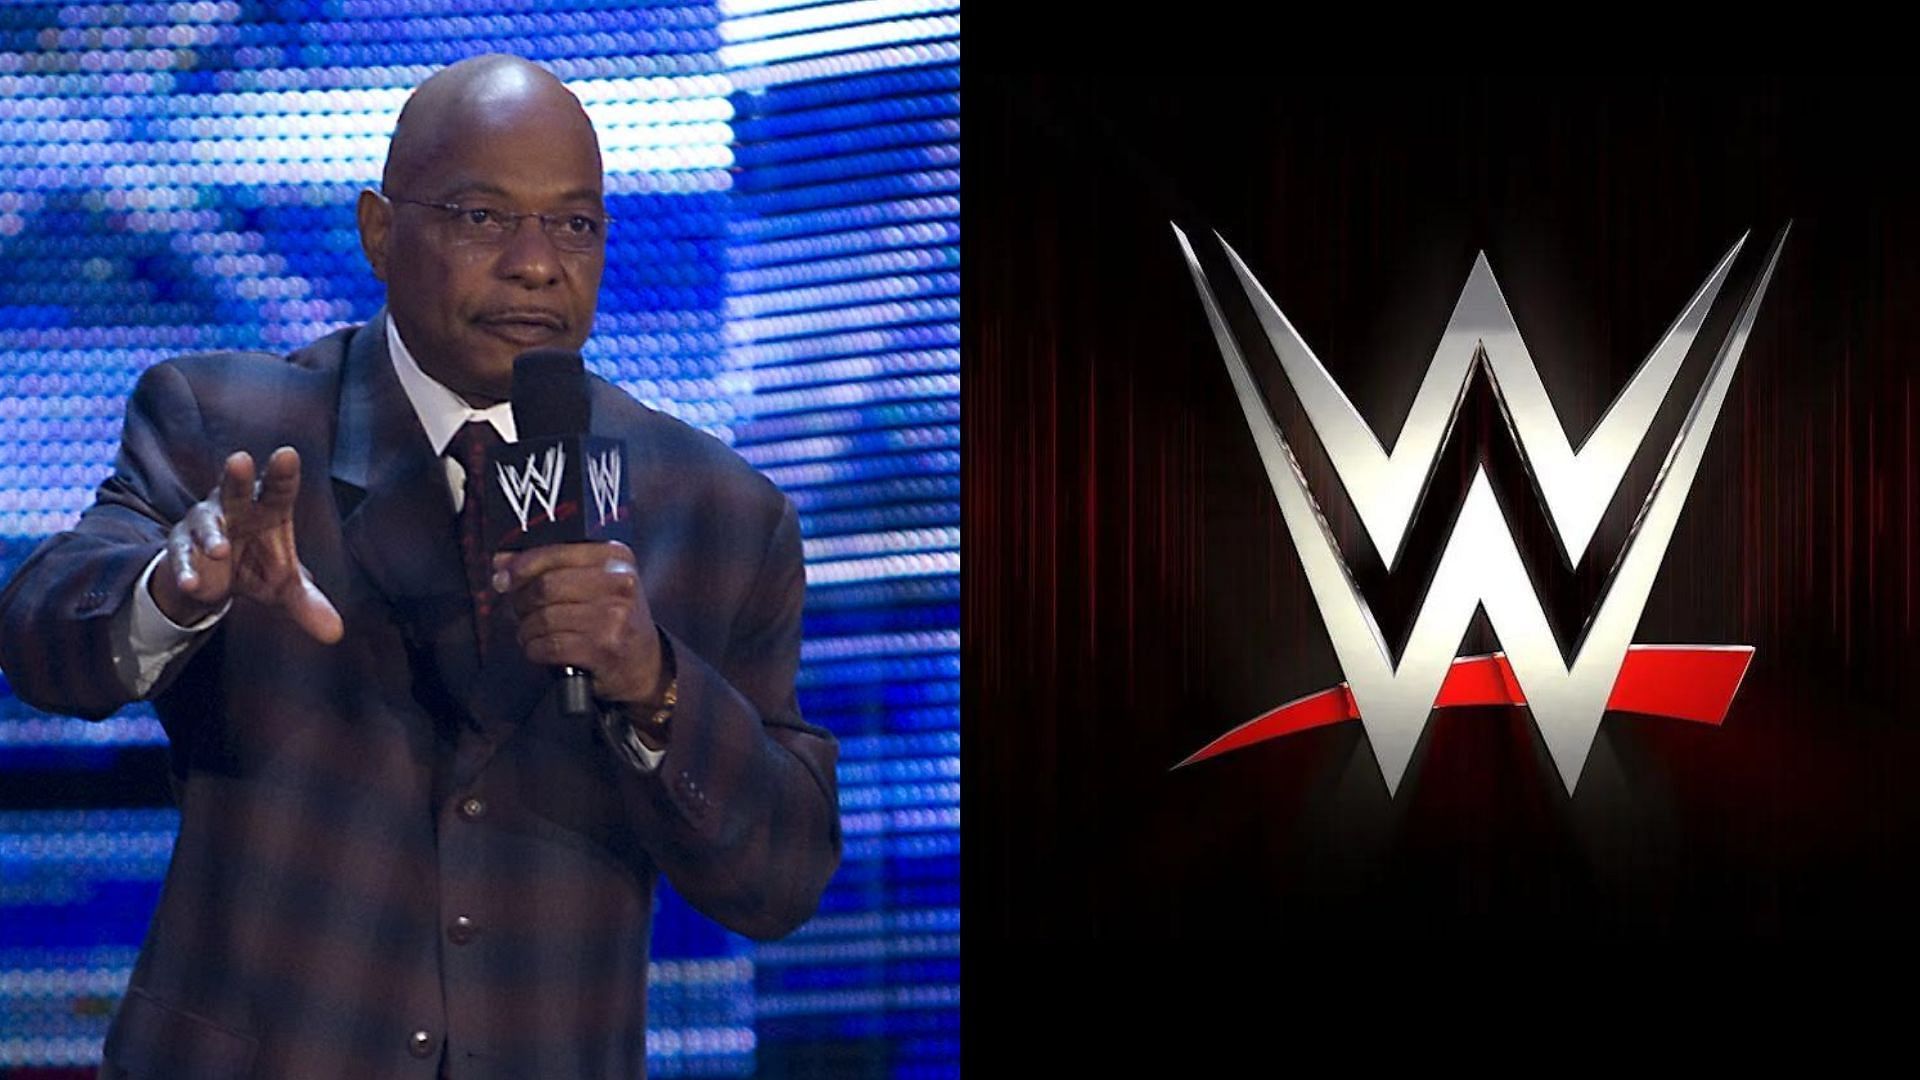 Teddy Long was inducted into the WWE Hall of Fame in 2017